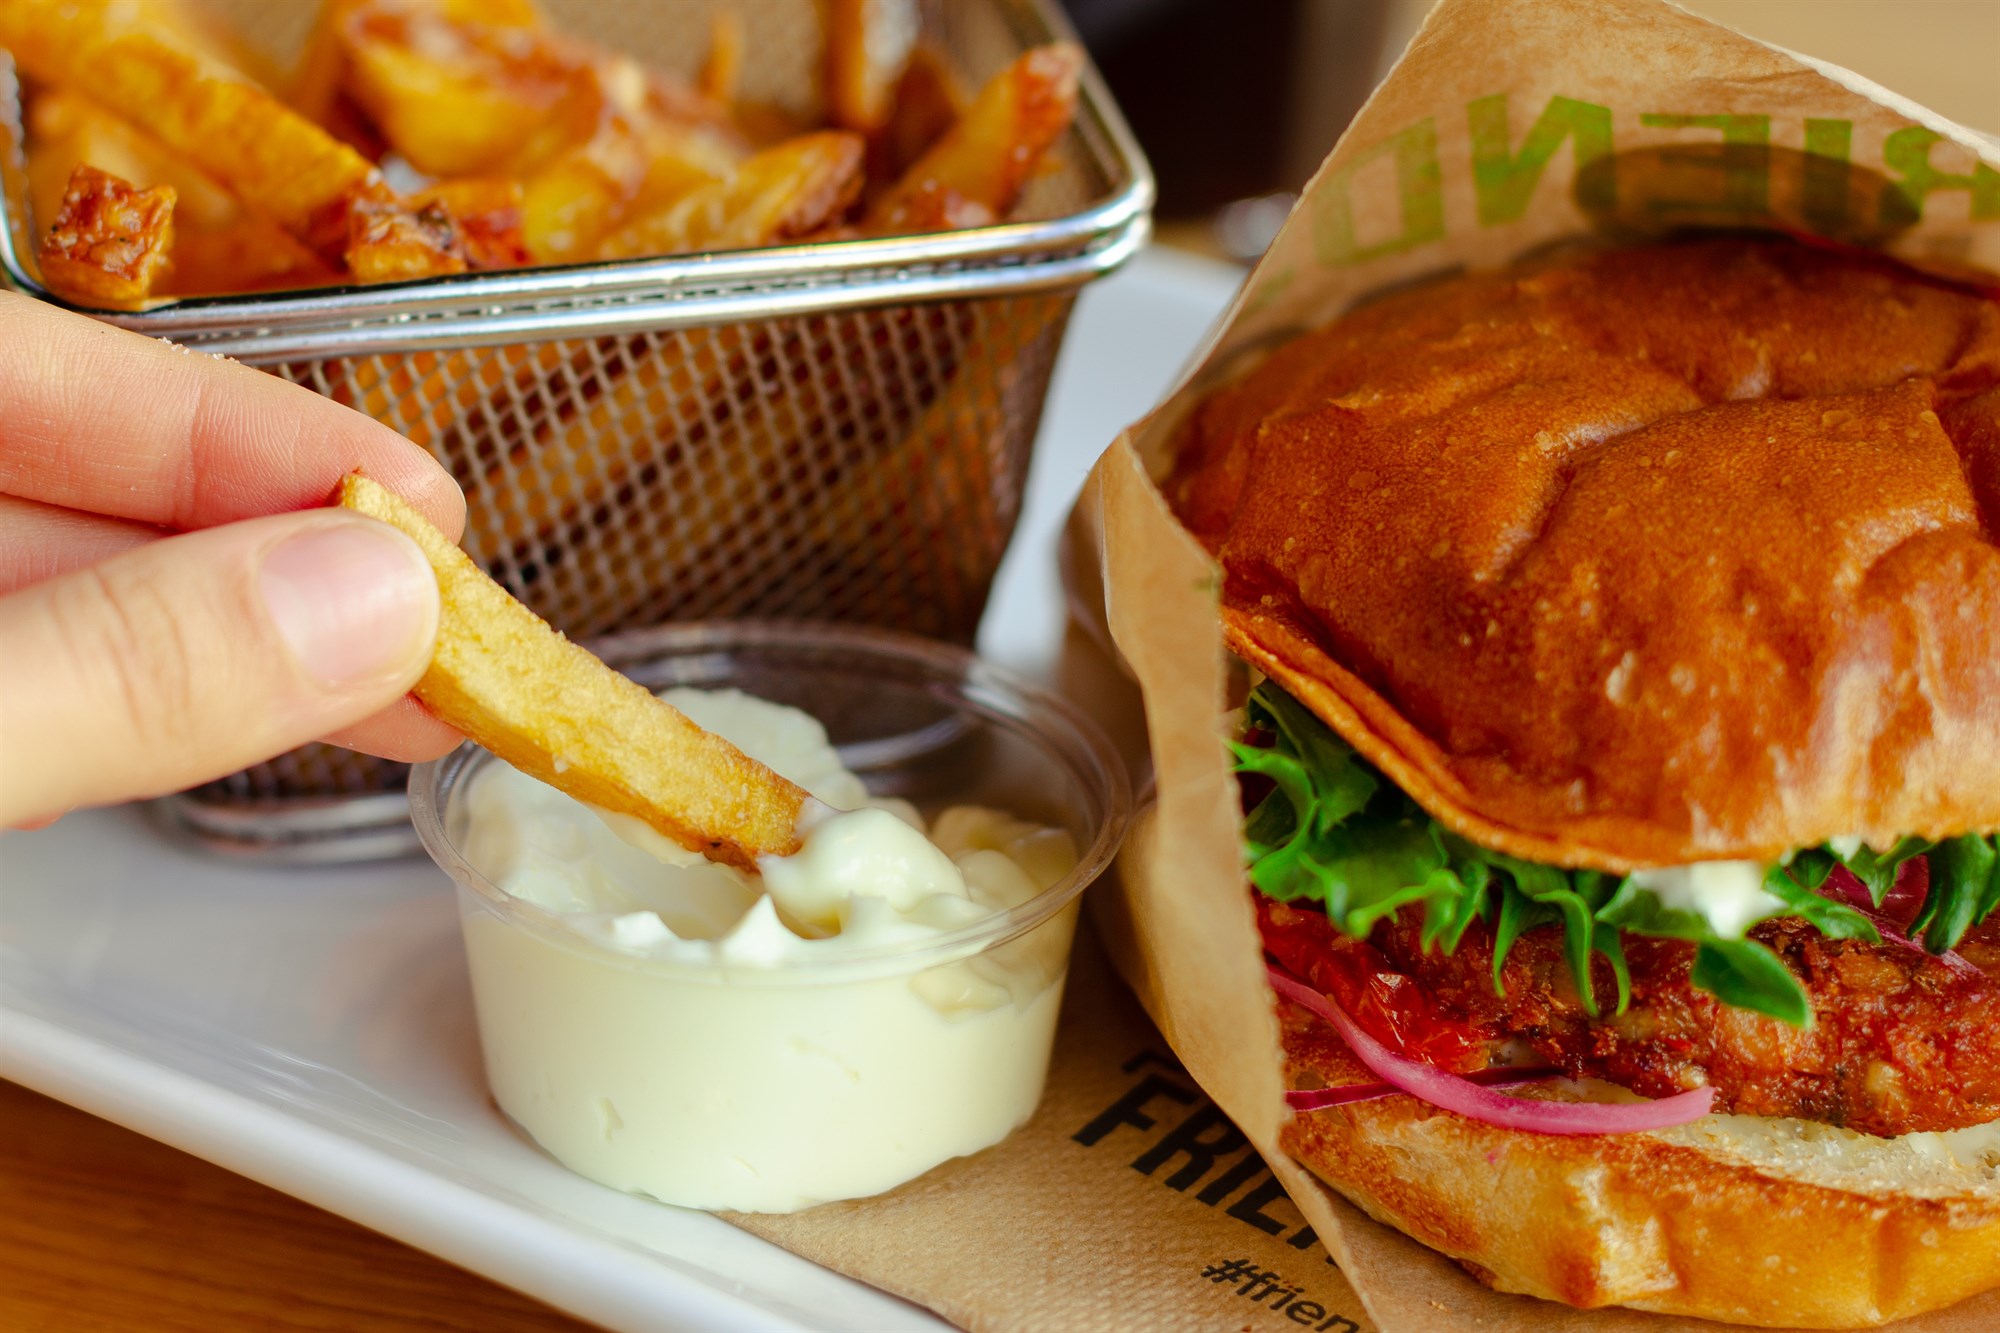 Our Guide to Fast Food Restaurants in Reykjavik